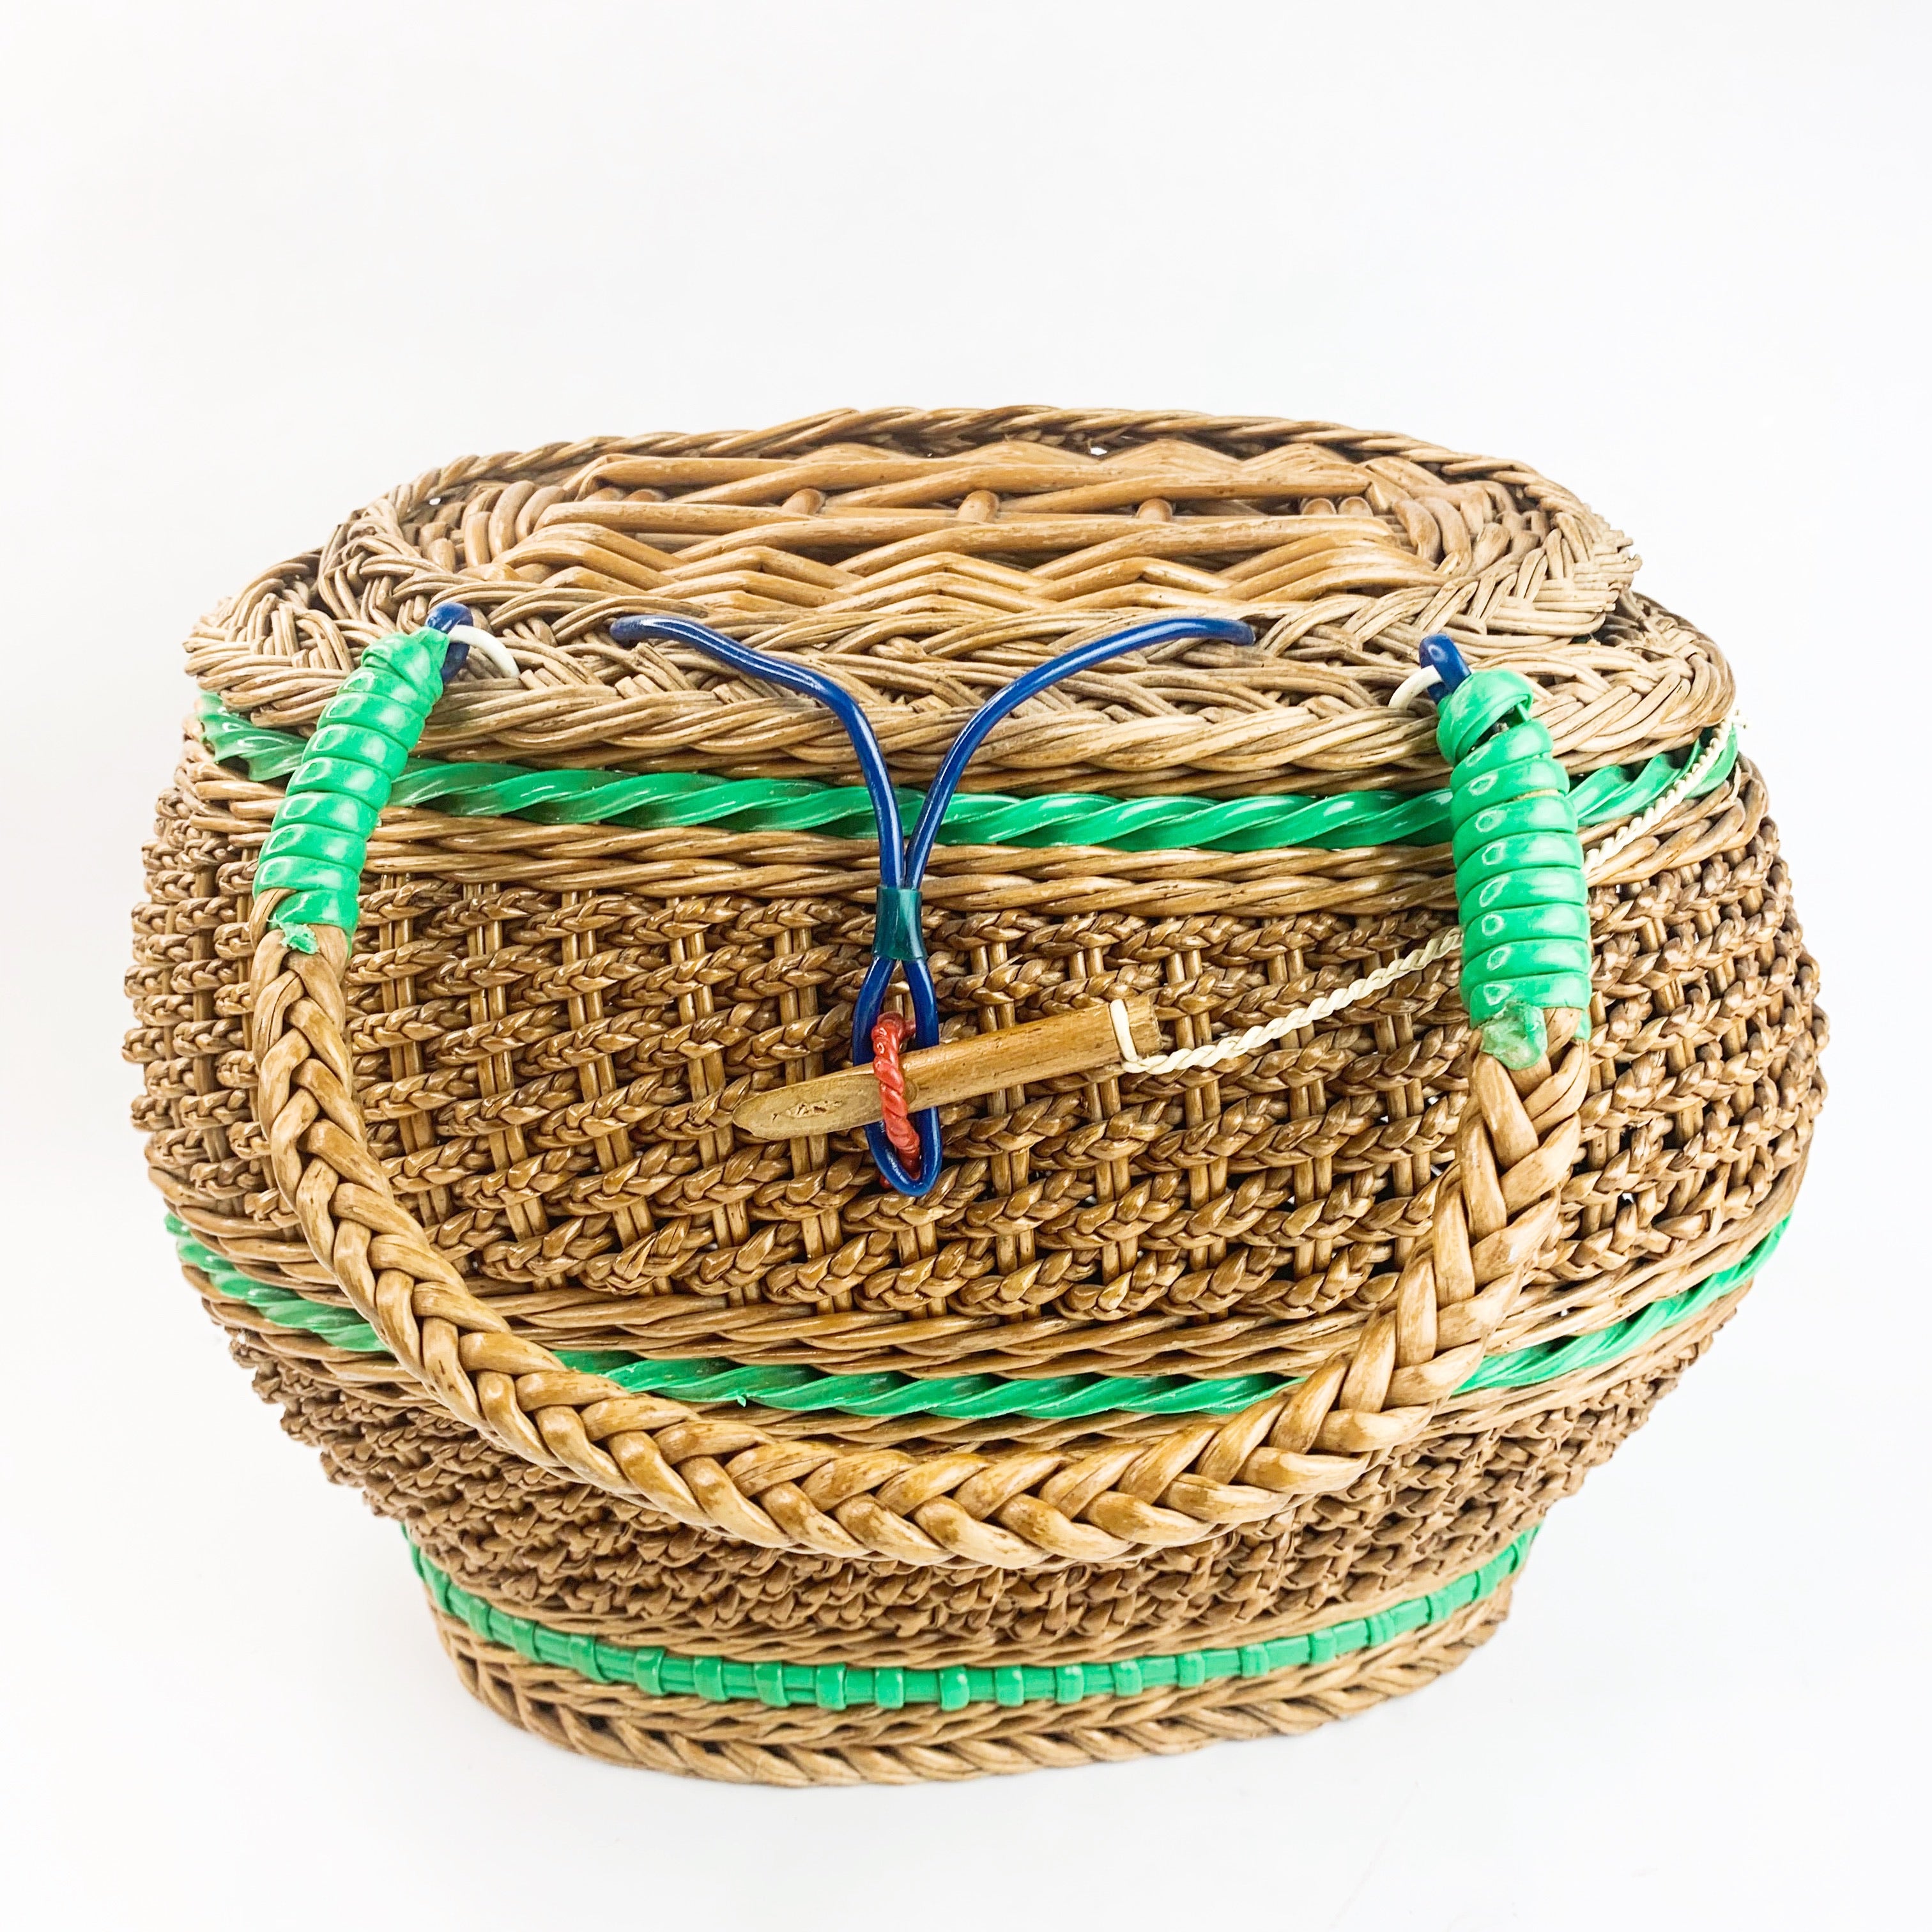 Woven basket purse with floral design from Maes Millinery Shop. A purse  with leather handles made from woven grass like a basket, with the floral  pattern on the front and lid executed